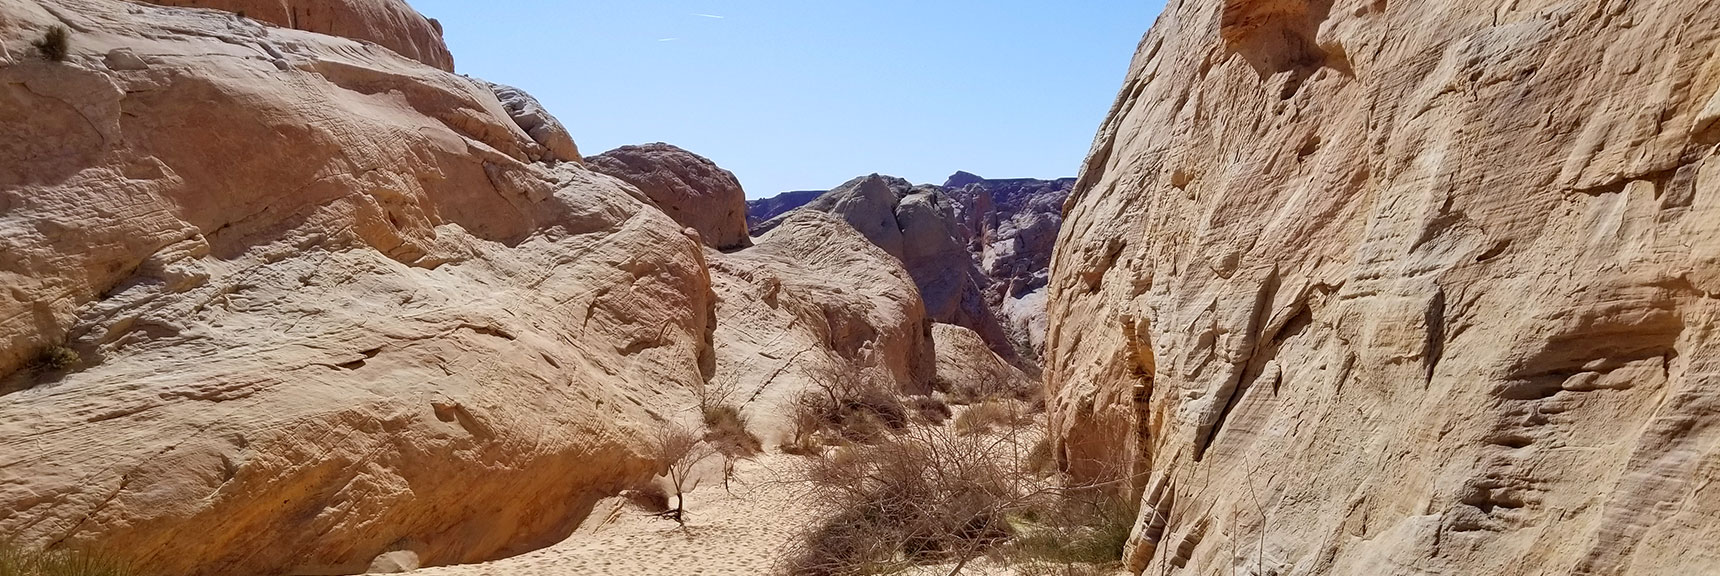 Initial Ascent into White Domes Loop Trail in Valley of Fire State Park, Nevada